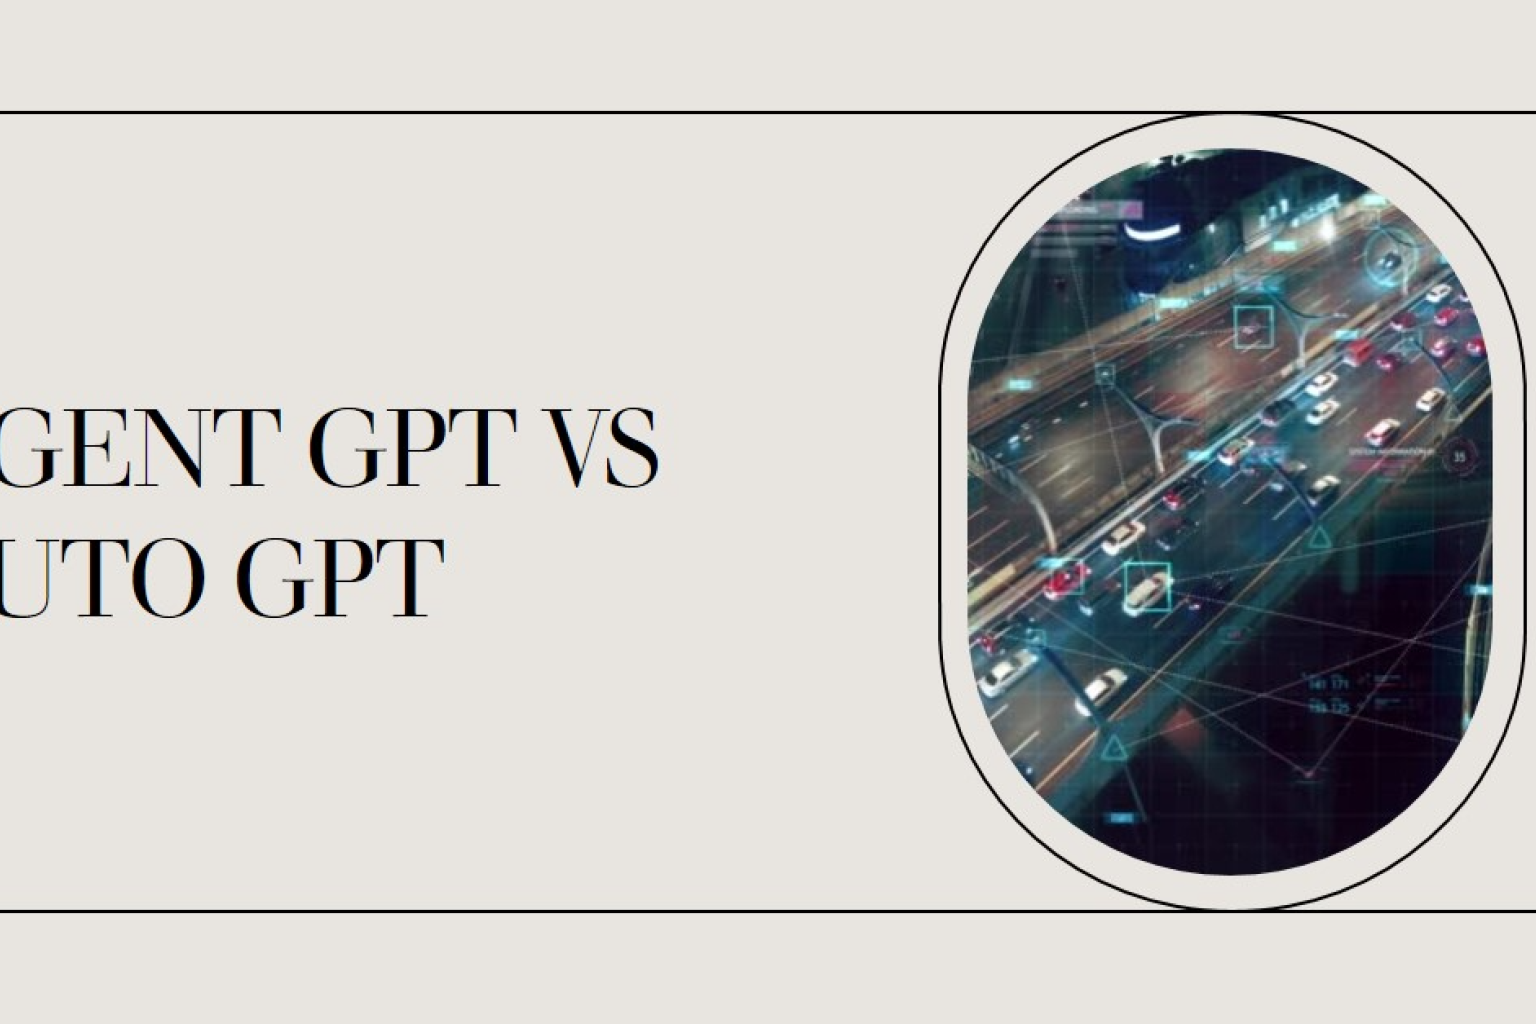 A comprehensive analysis of OpenAI's Agent GPT and Auto GPT, explaining their characteristics, differences, and optimal use cases.